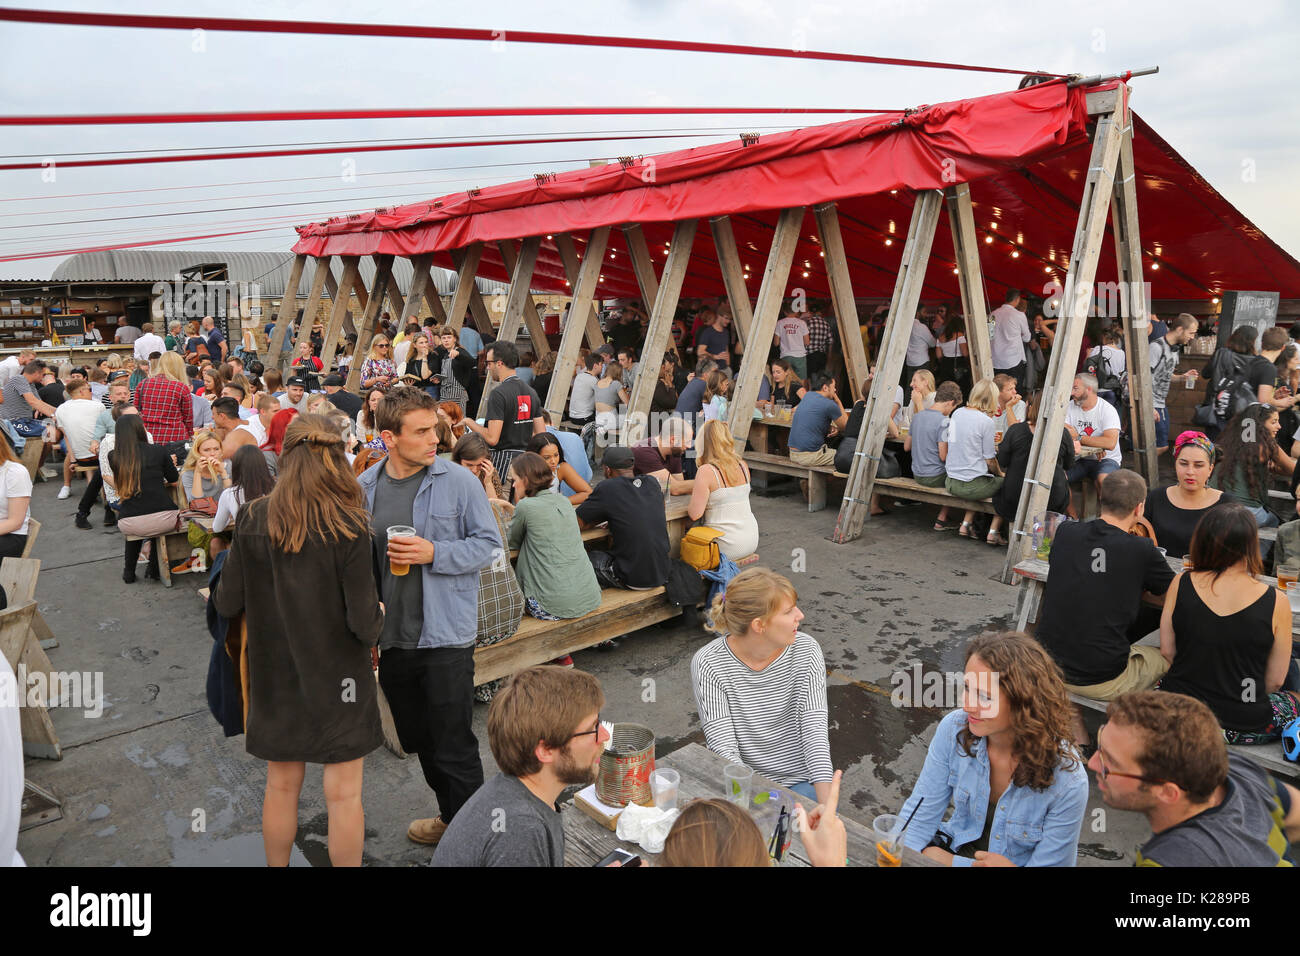 Frank's Café, the famous roof-top bar and restaurant on the multi-storey car park in Peckham, south London, UK. shows the temporary roof and bar area. Stock Photo